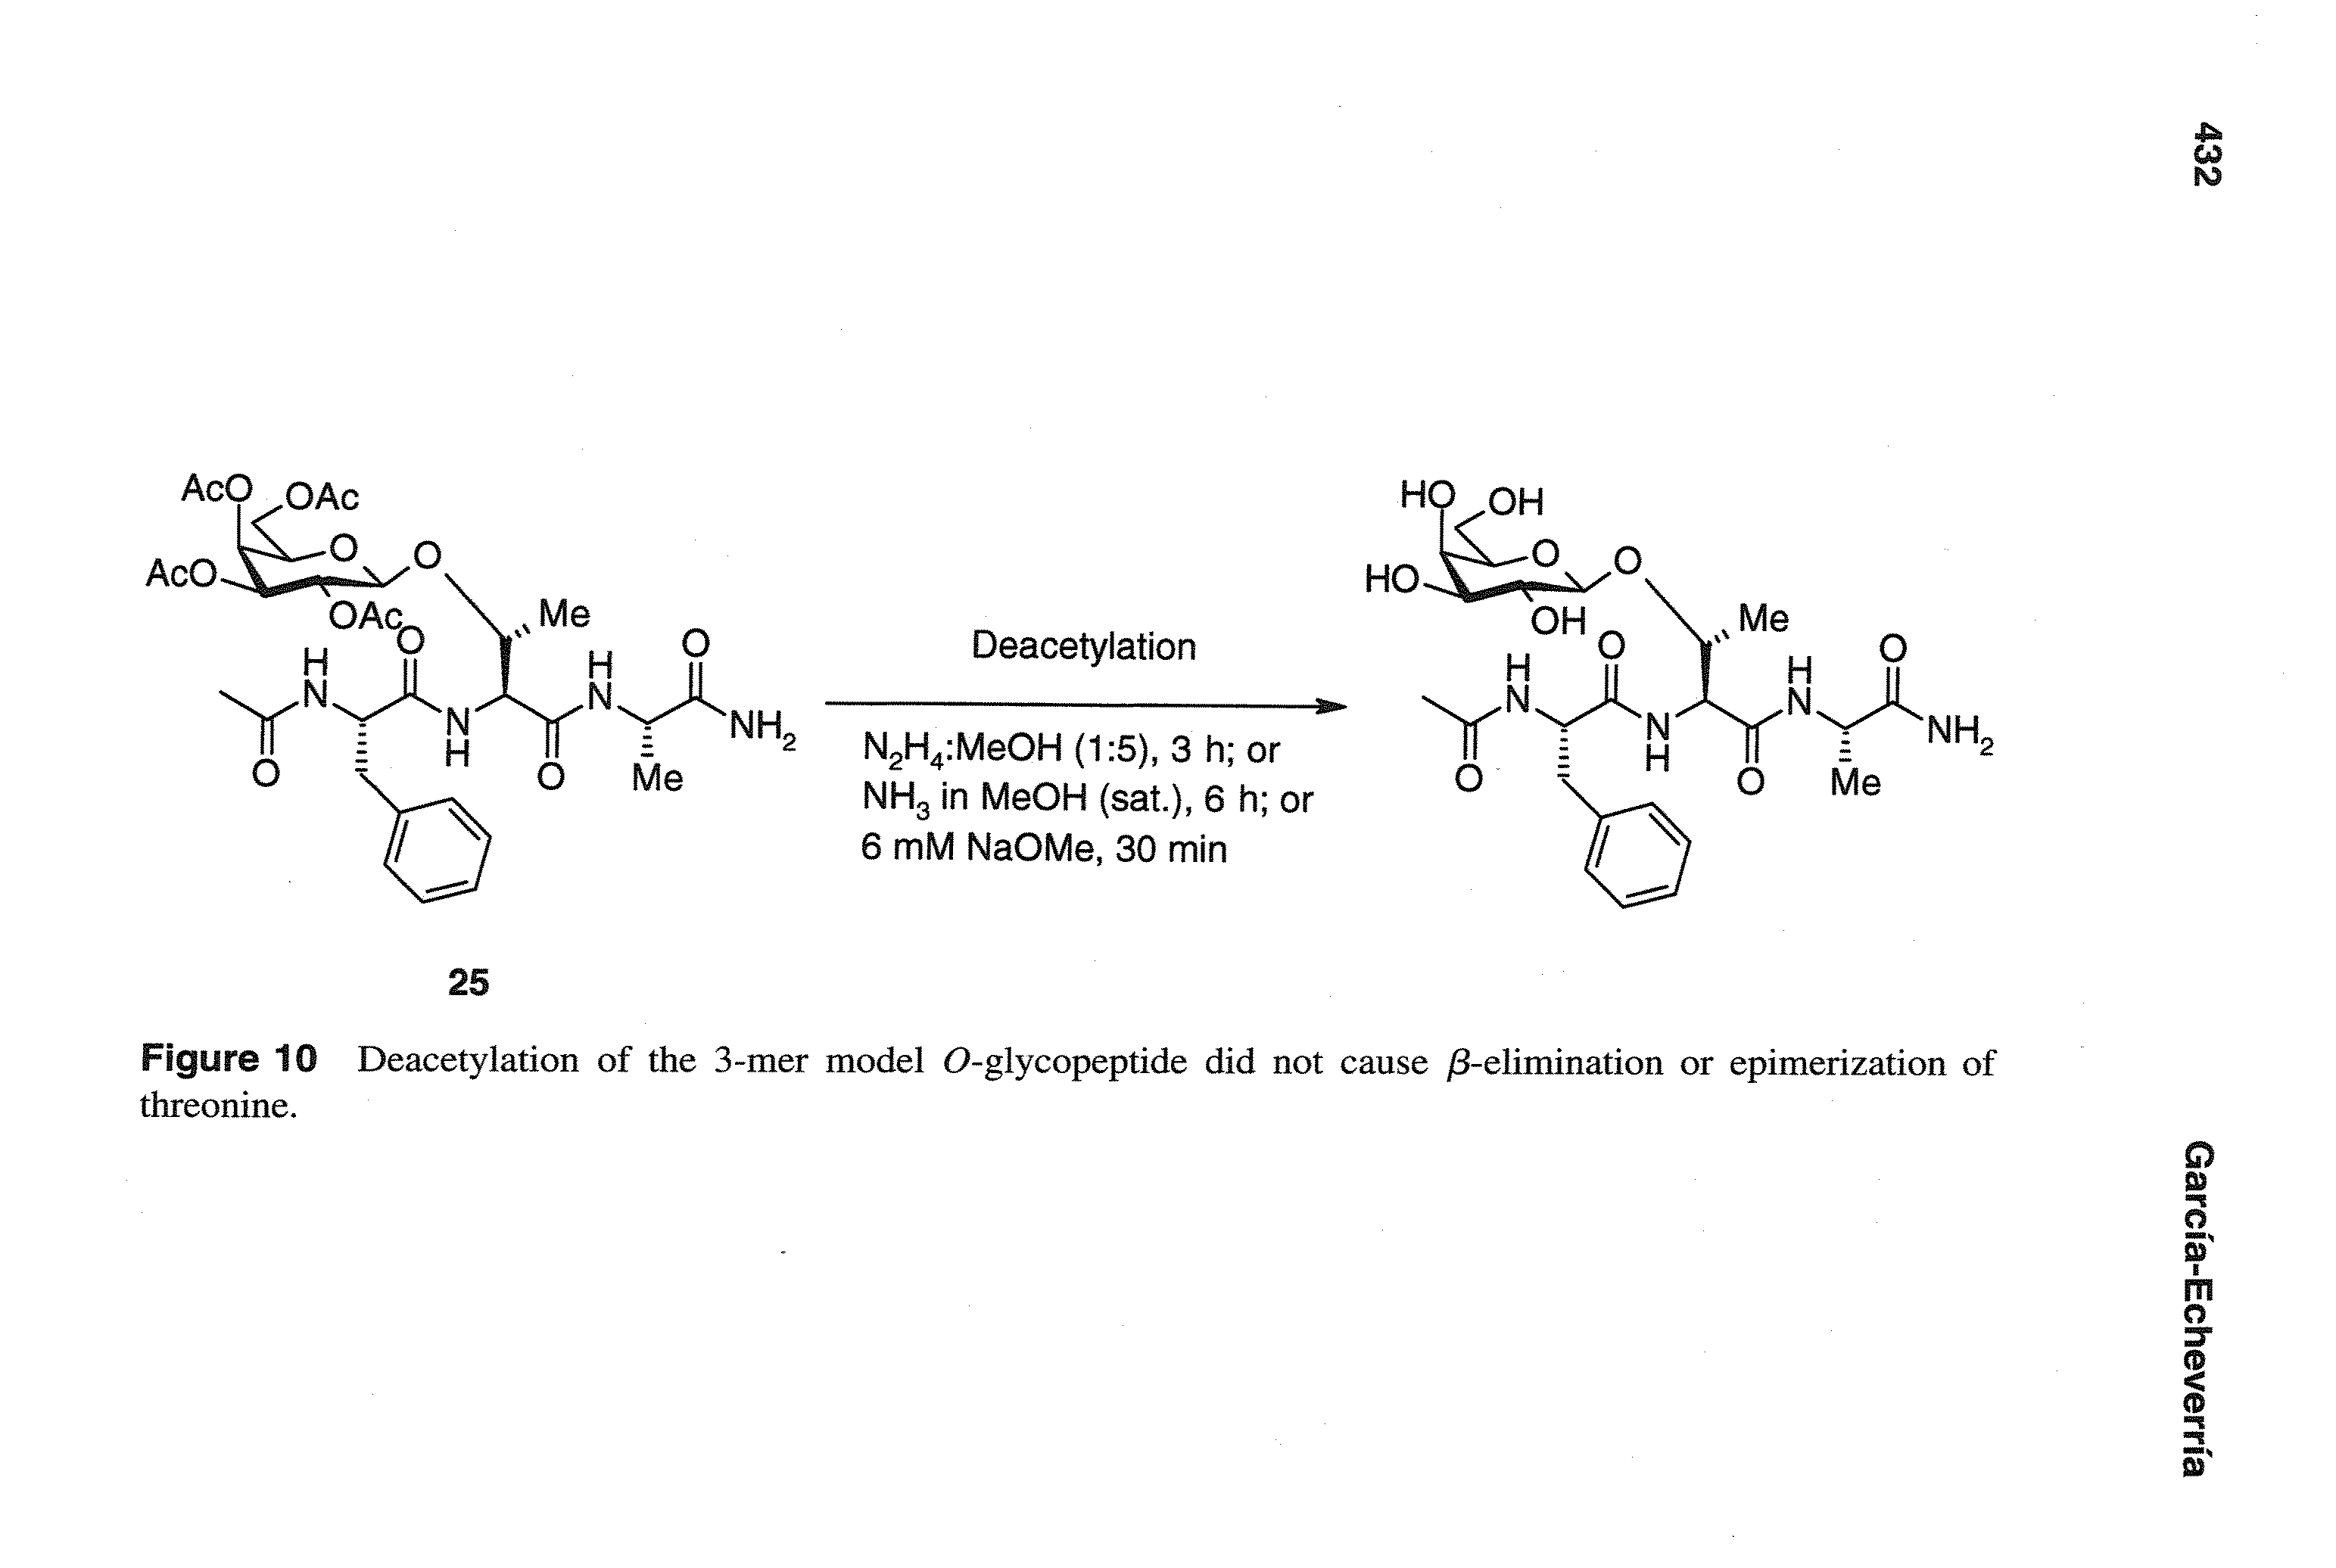 Figure 10 Deacetylation of the 3-mer model O-glycopeptide did not cause -elimination or epimerization of threonine.